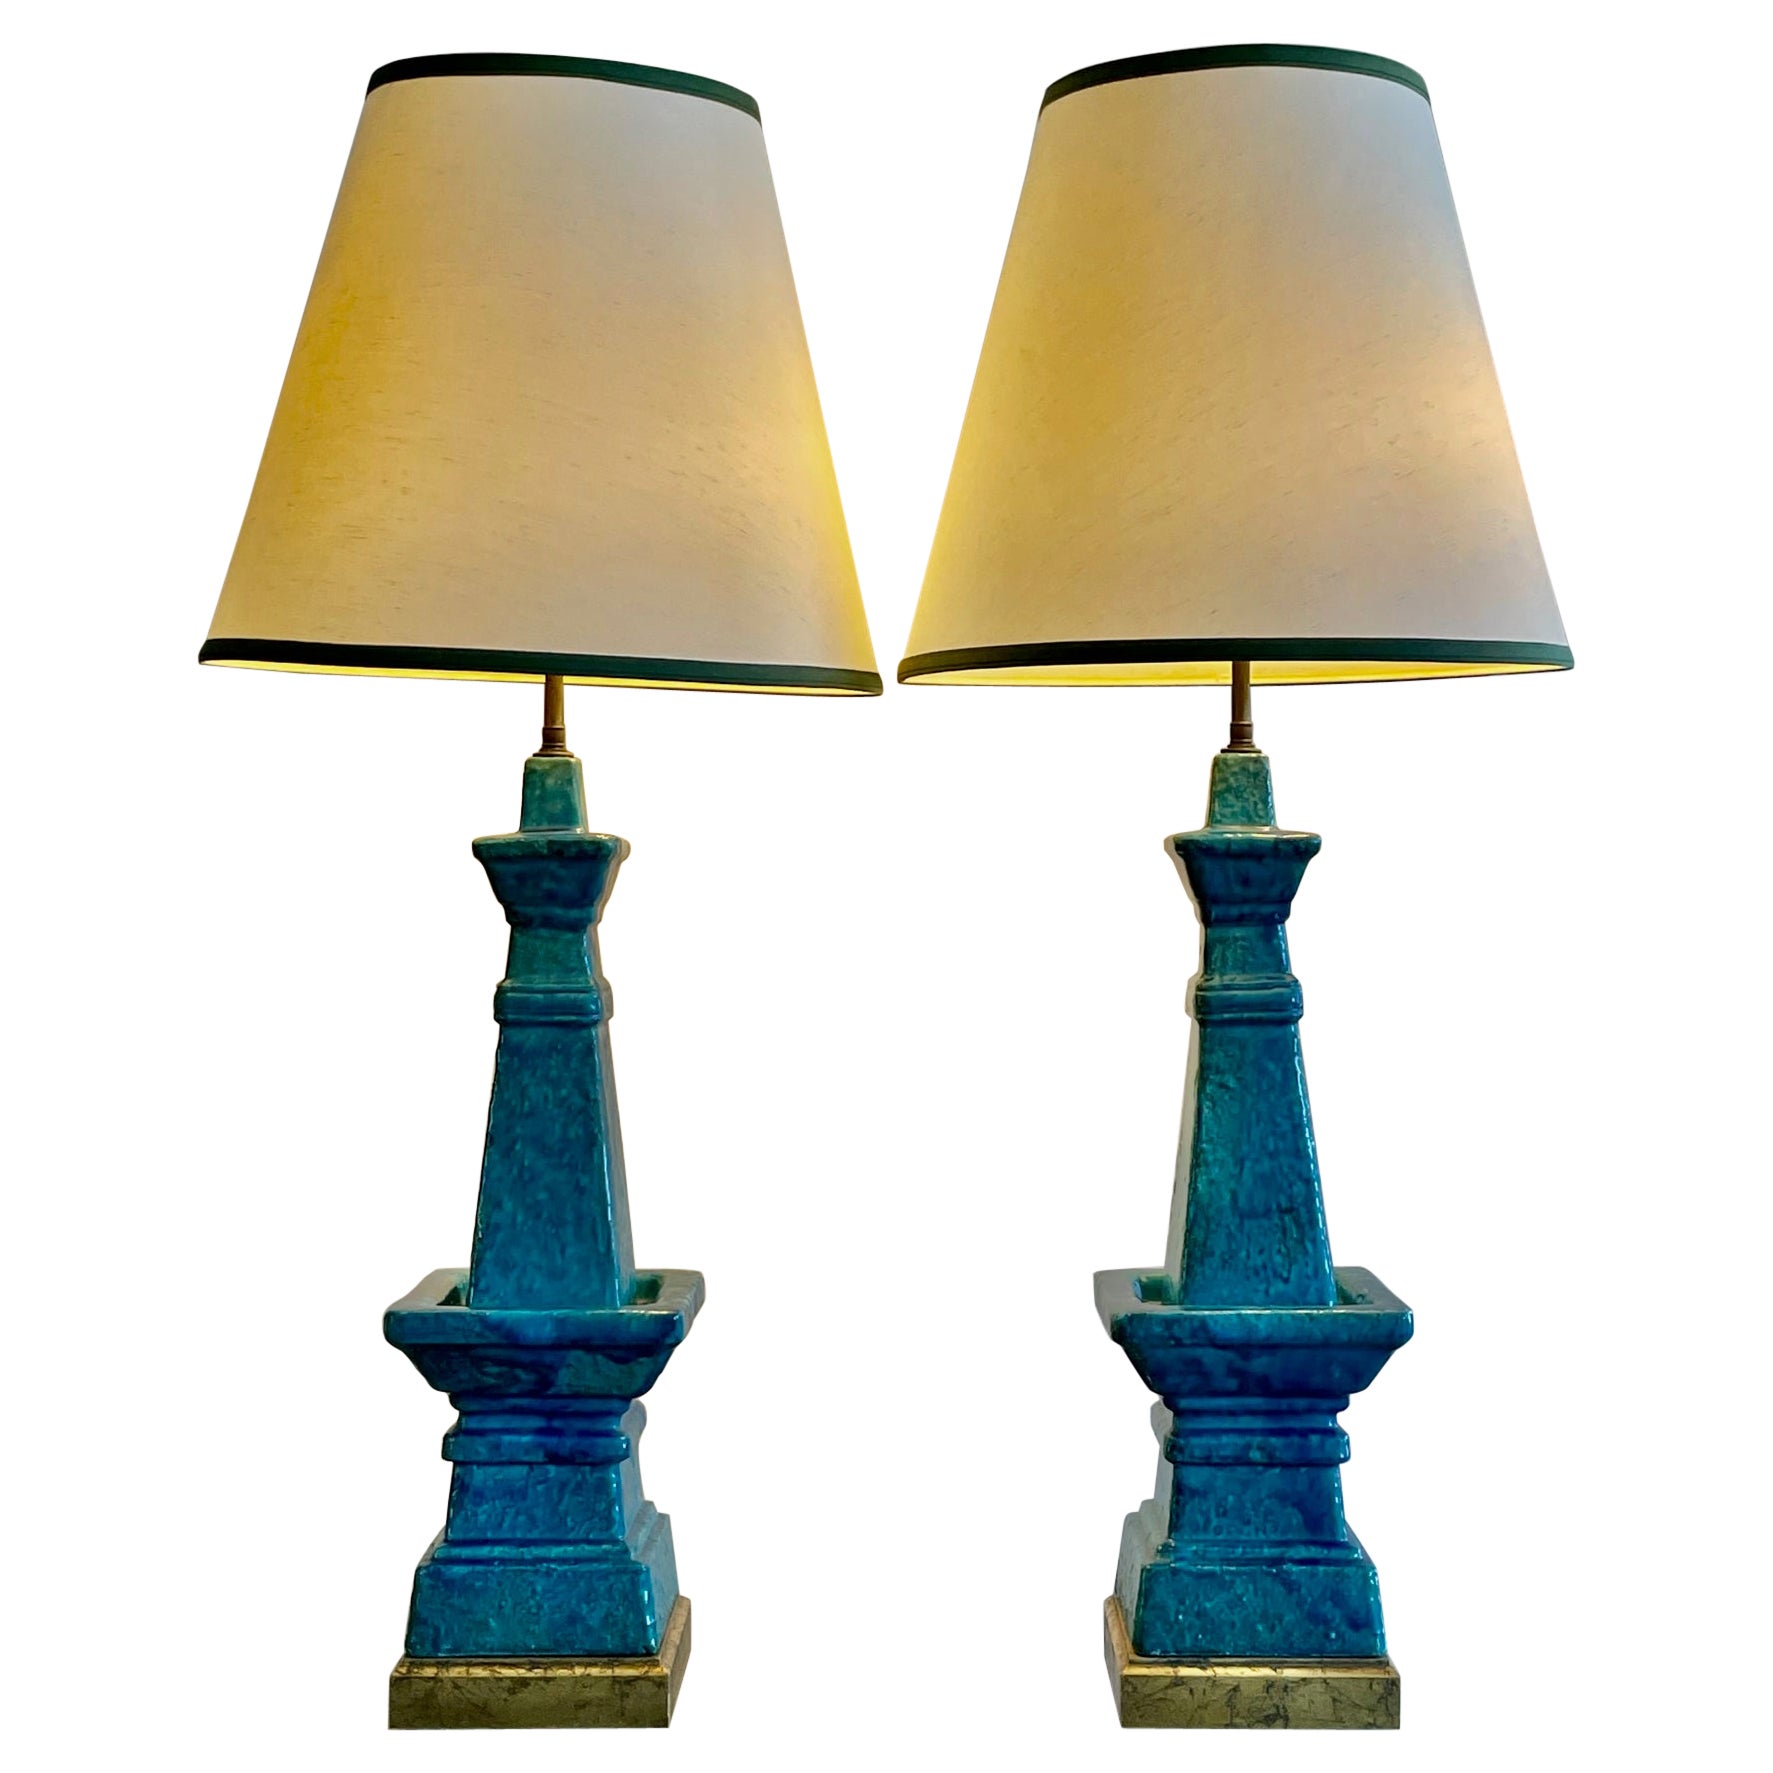 Pair of Architectural Bitossi Lamps